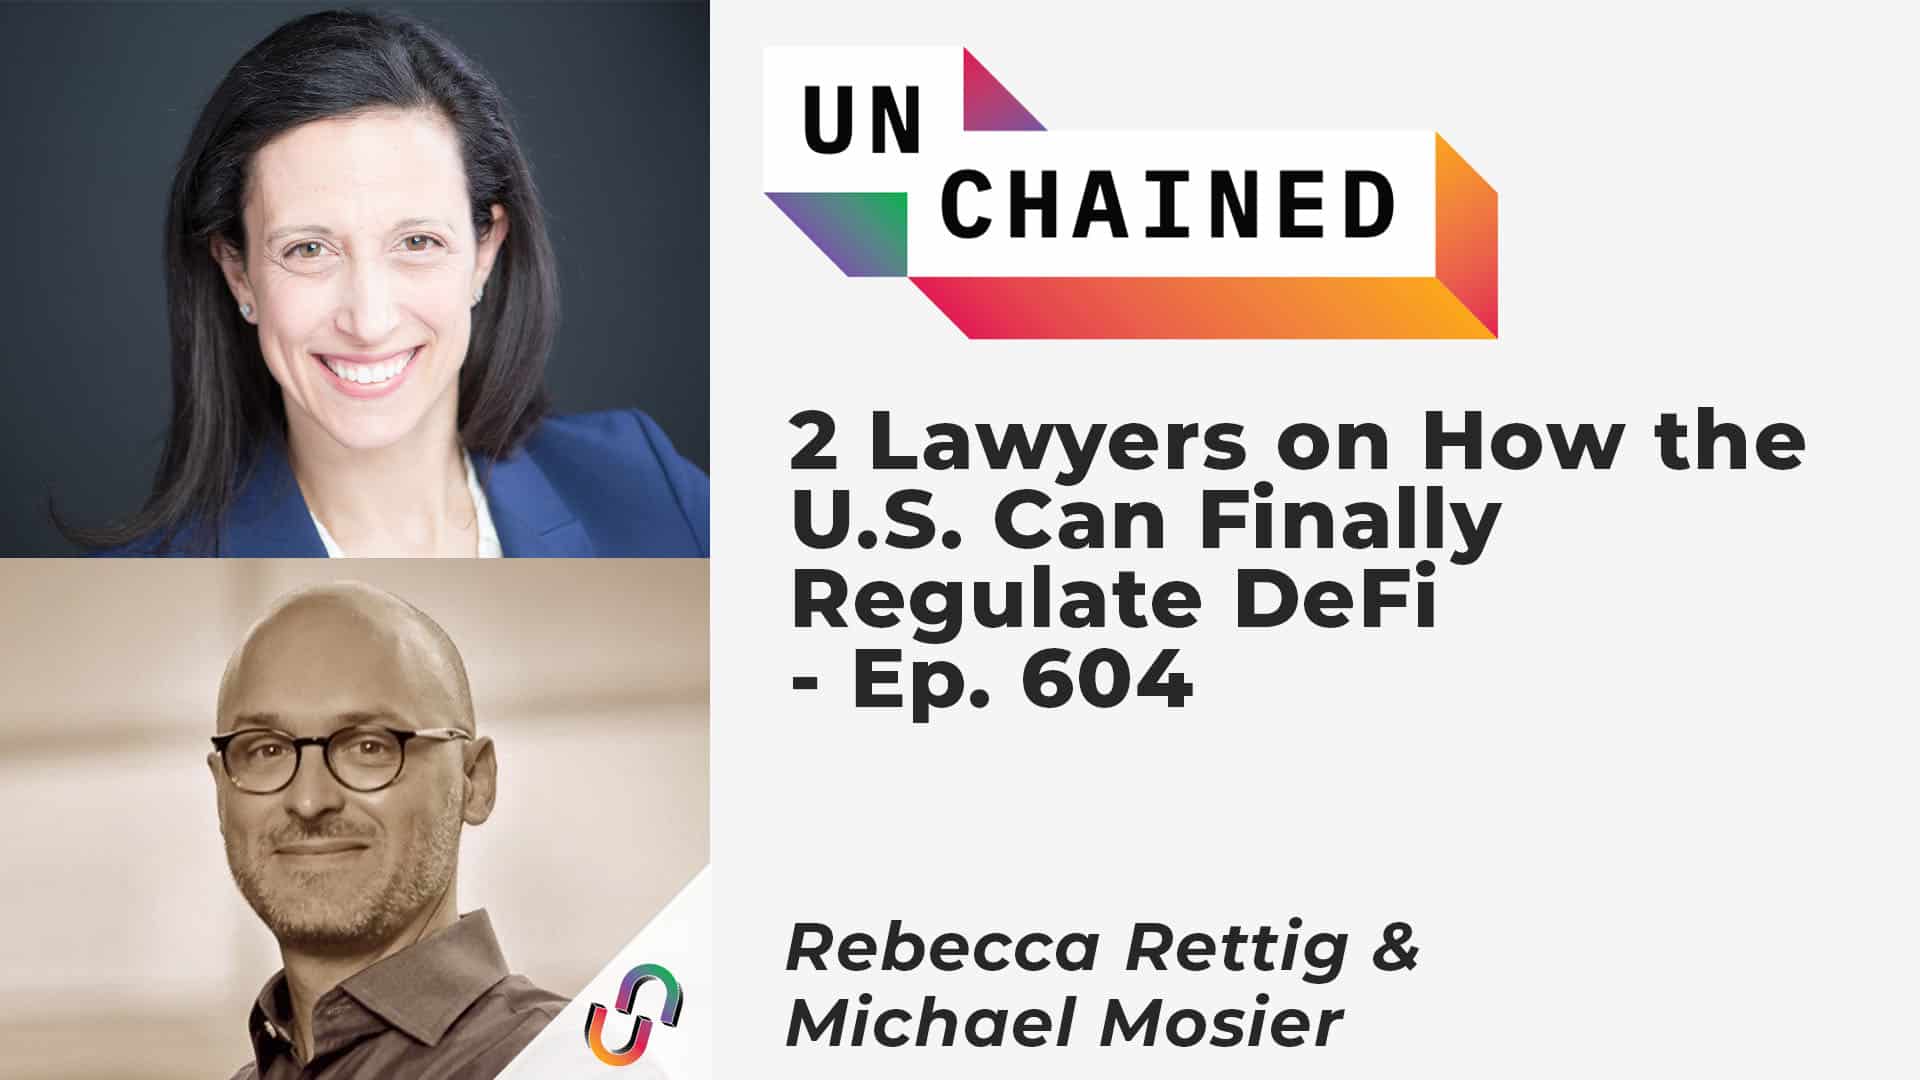 2 Lawyers on How the U.S. Can Finally Regulate DeFi - Ep. 604